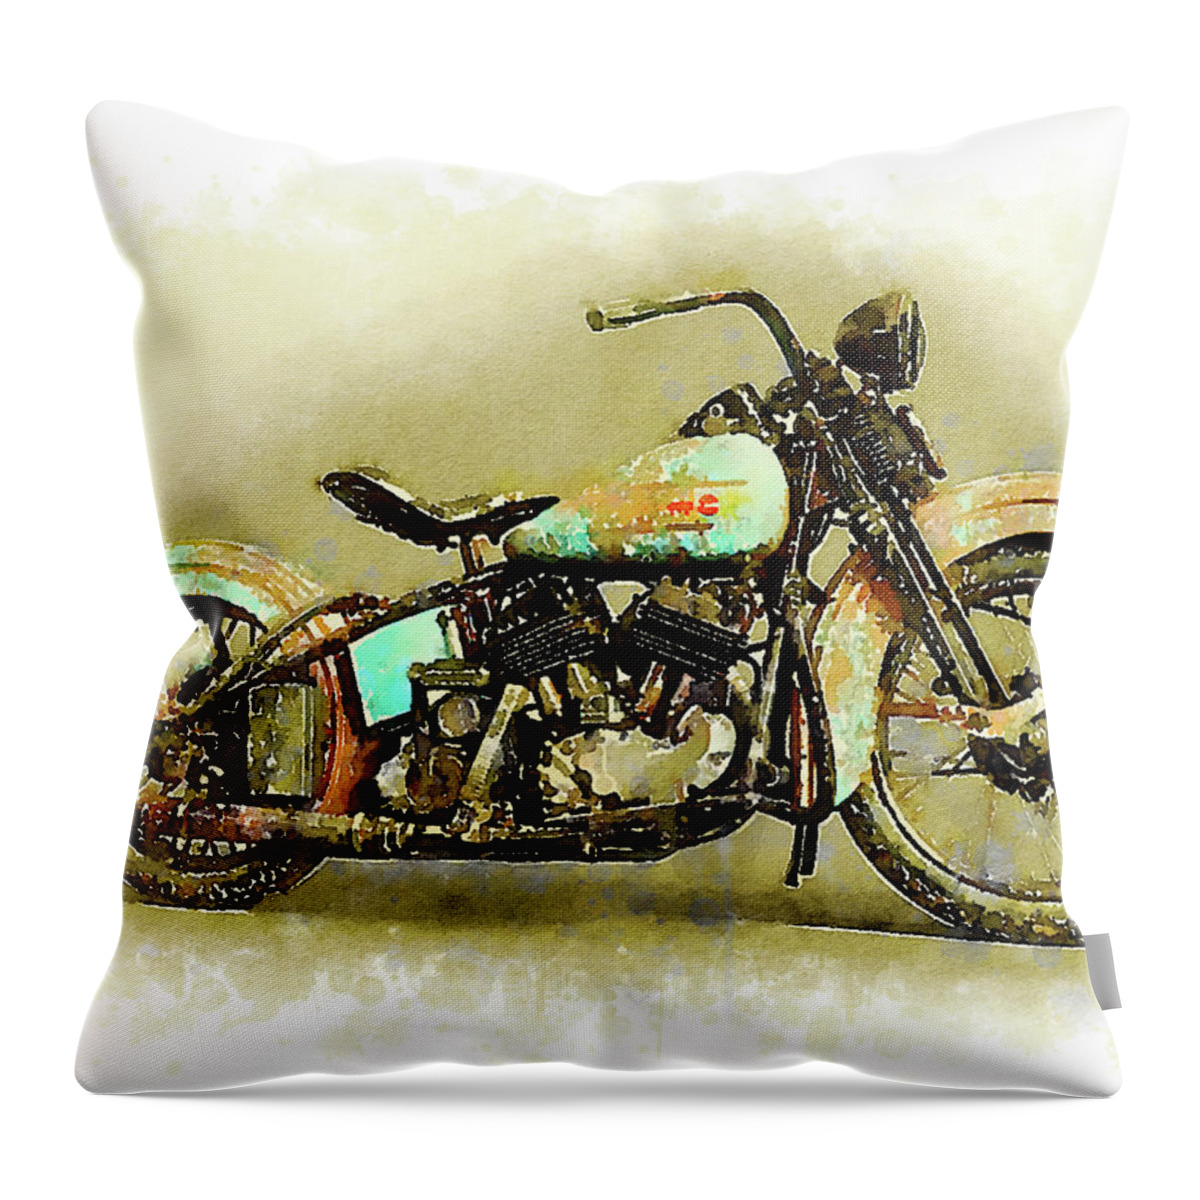 Art Throw Pillow featuring the painting Watercolor Vintage Harley-Davidson by Vart. by Vart